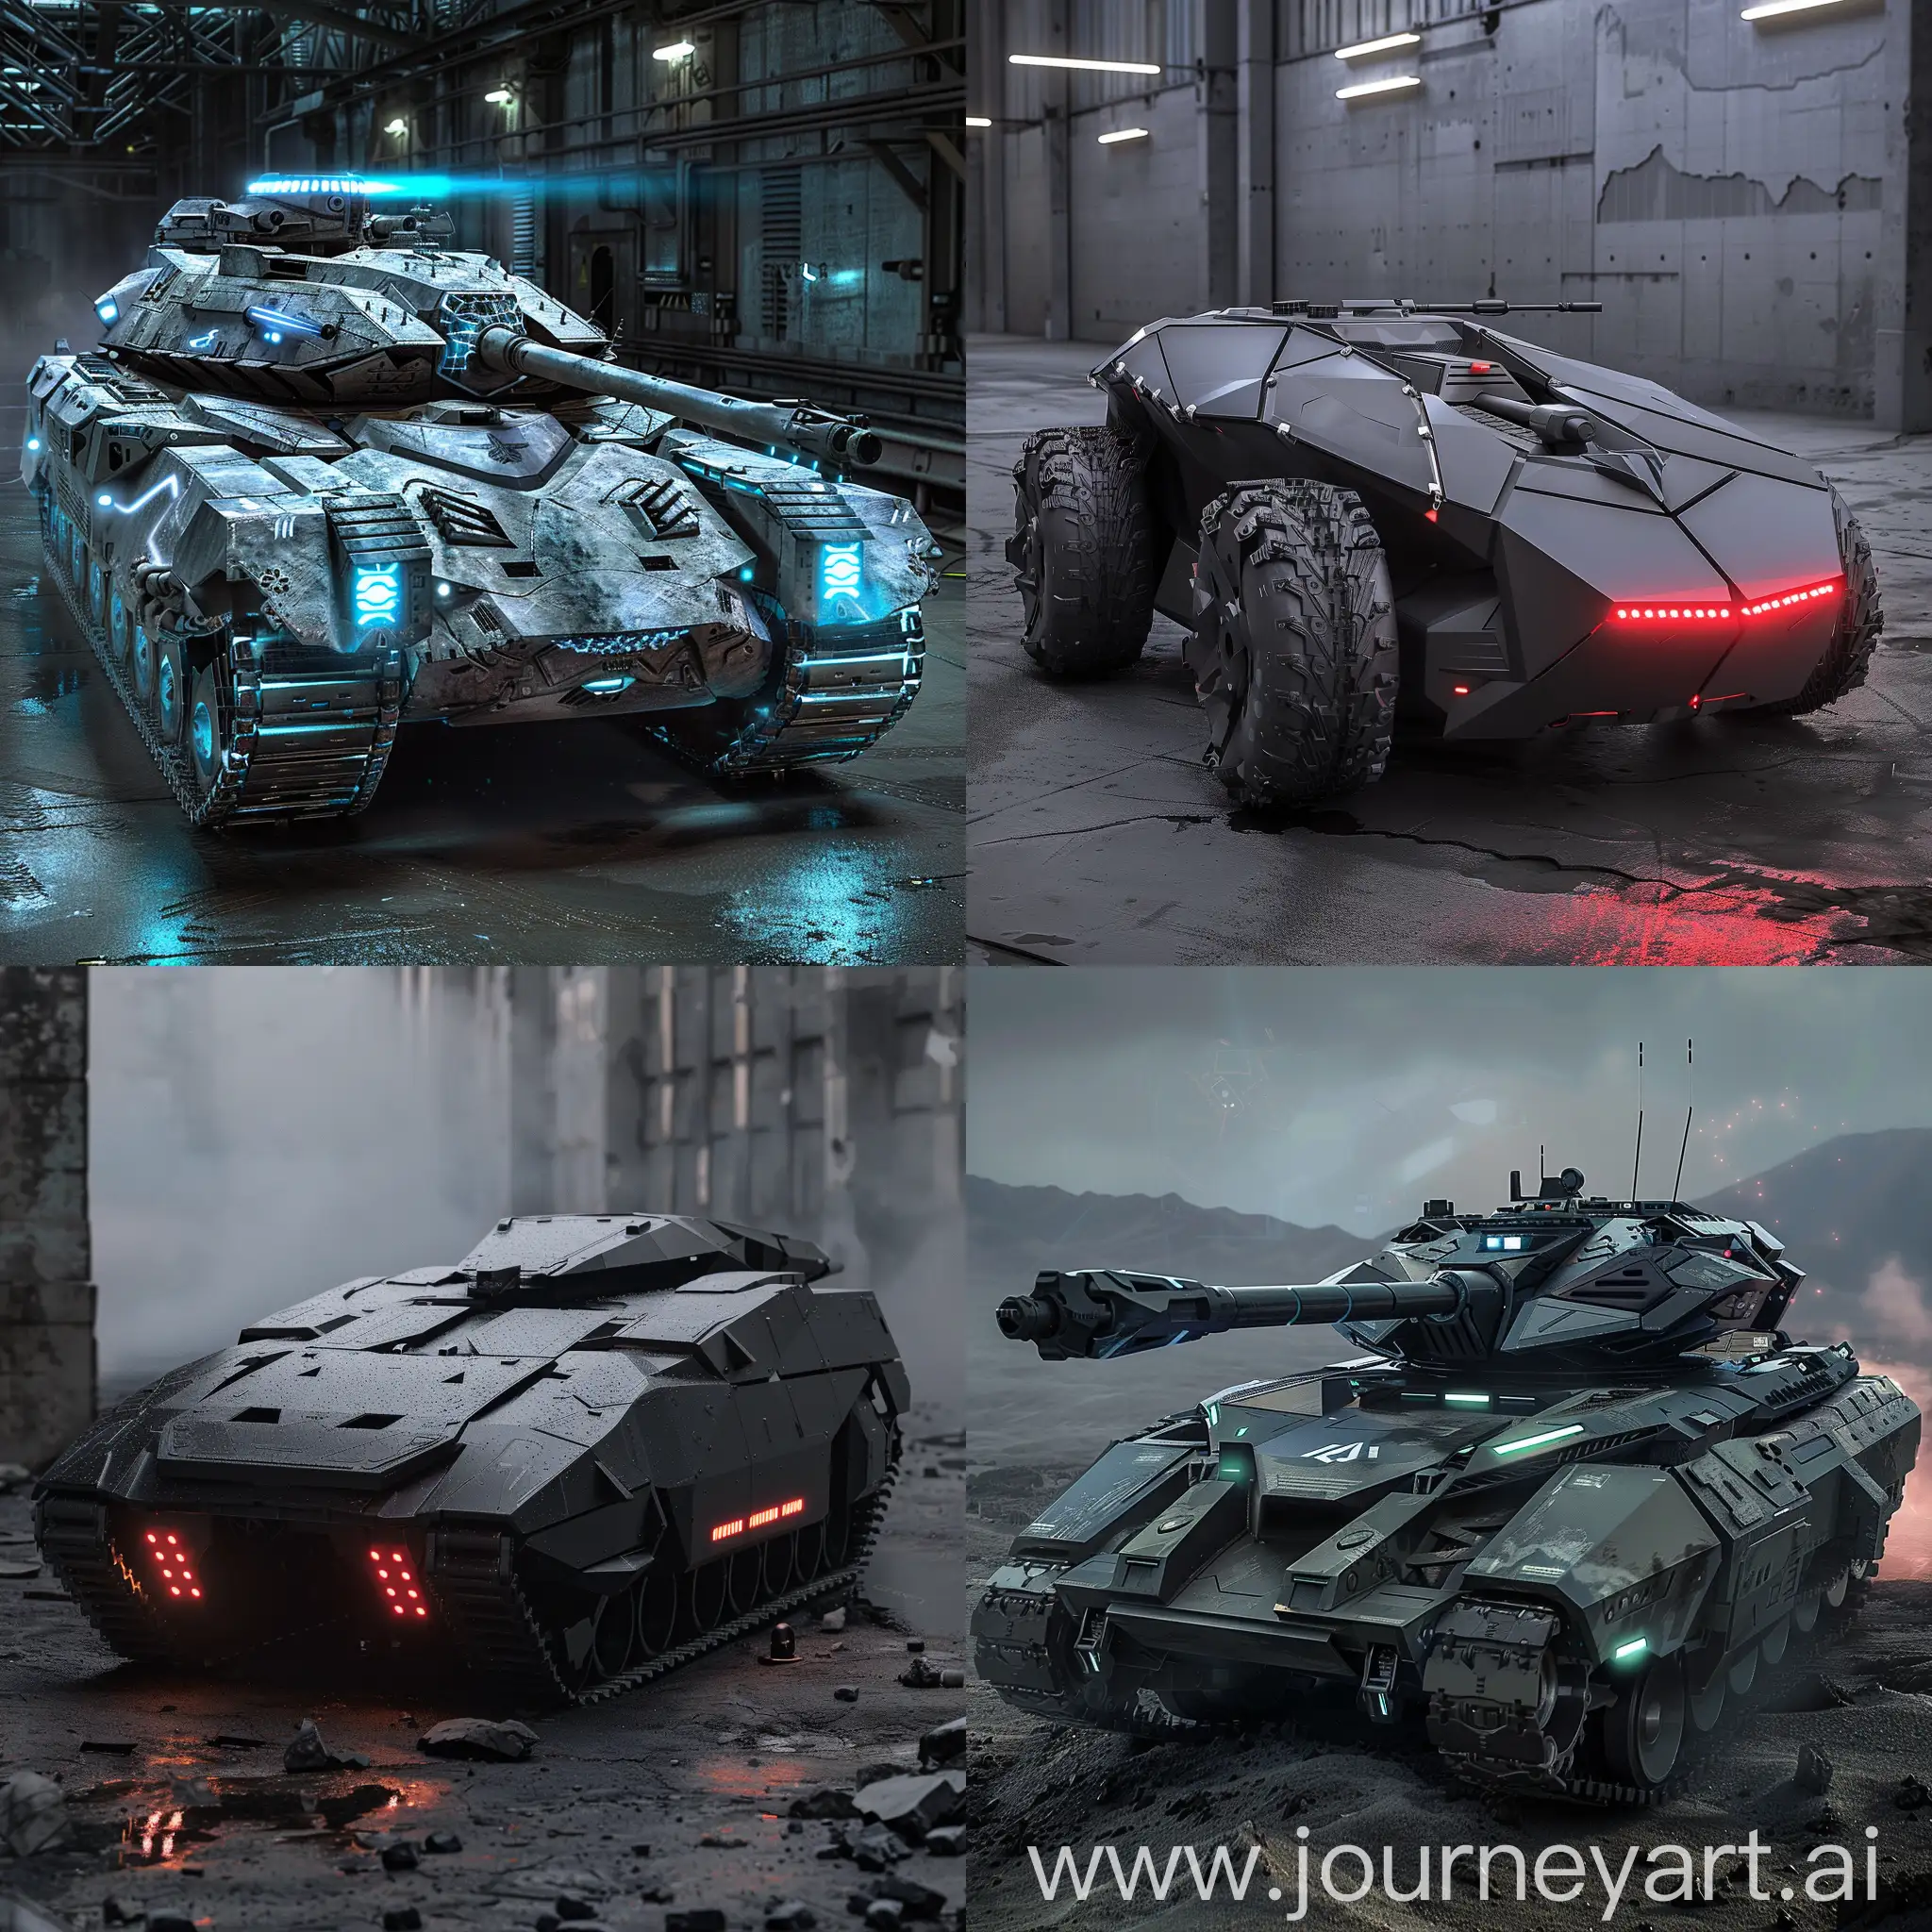 Futuristic tank, Morphing Reactive Armor, Neural Network Warfare Suite, Quantum-Shielded Engine, Genetically Engineered Crew Enhancements, 3D-Printed Replacement Parts, Robotic Repair Drones, Augmented Reality Targeting, Virtual Reality Training, Nano-Cloaking Technology, Emotion Recognition AI, Aerodynamic, Streamlined Chassis, Reactive Hardlight Defense Grid, Multi-Spectrum Camouflage Coating, Modular Weapon Pods, High-Powered Energy Cannons, Kinetic Ramming Blade, Drone Launch Bays, Integrated Sensor Array, Neuro-Operated Turret System, Dynamic Lighting System, in unreal engine 5 style --stylize 1000